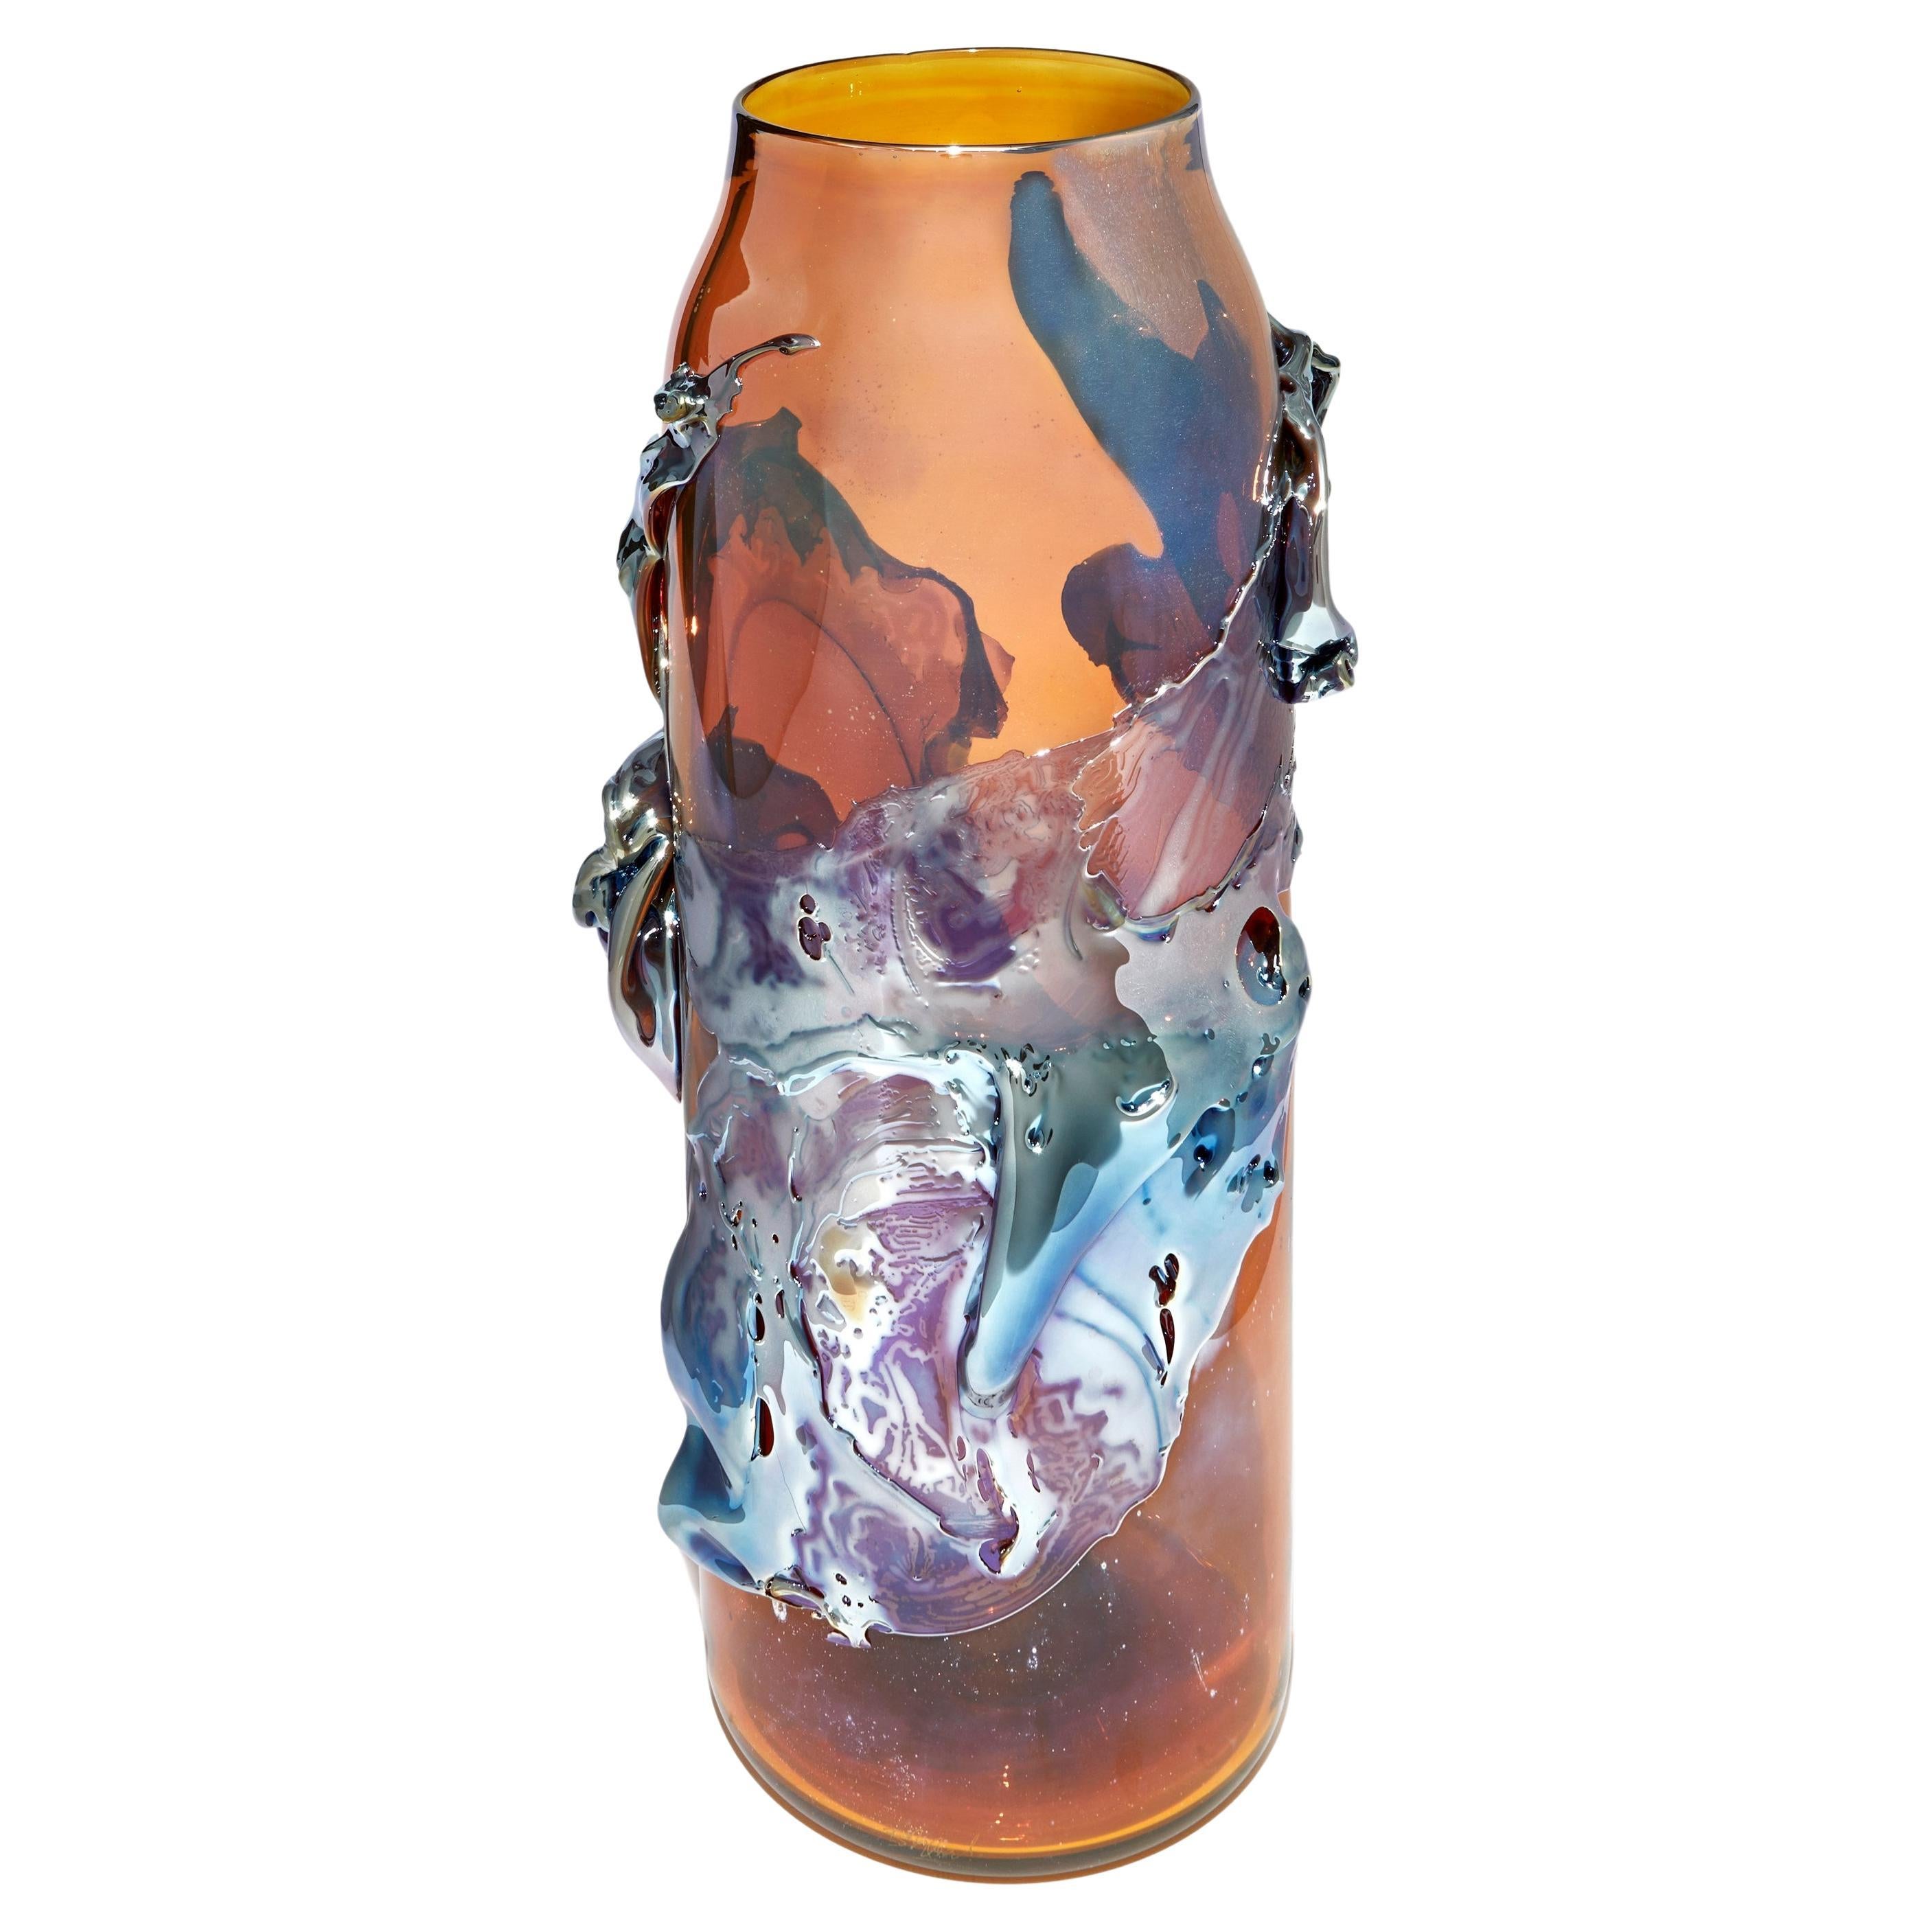 Panorama in Nectar, an Amber & Metallic Blue Abstract Glass Vase by Bethany Wood